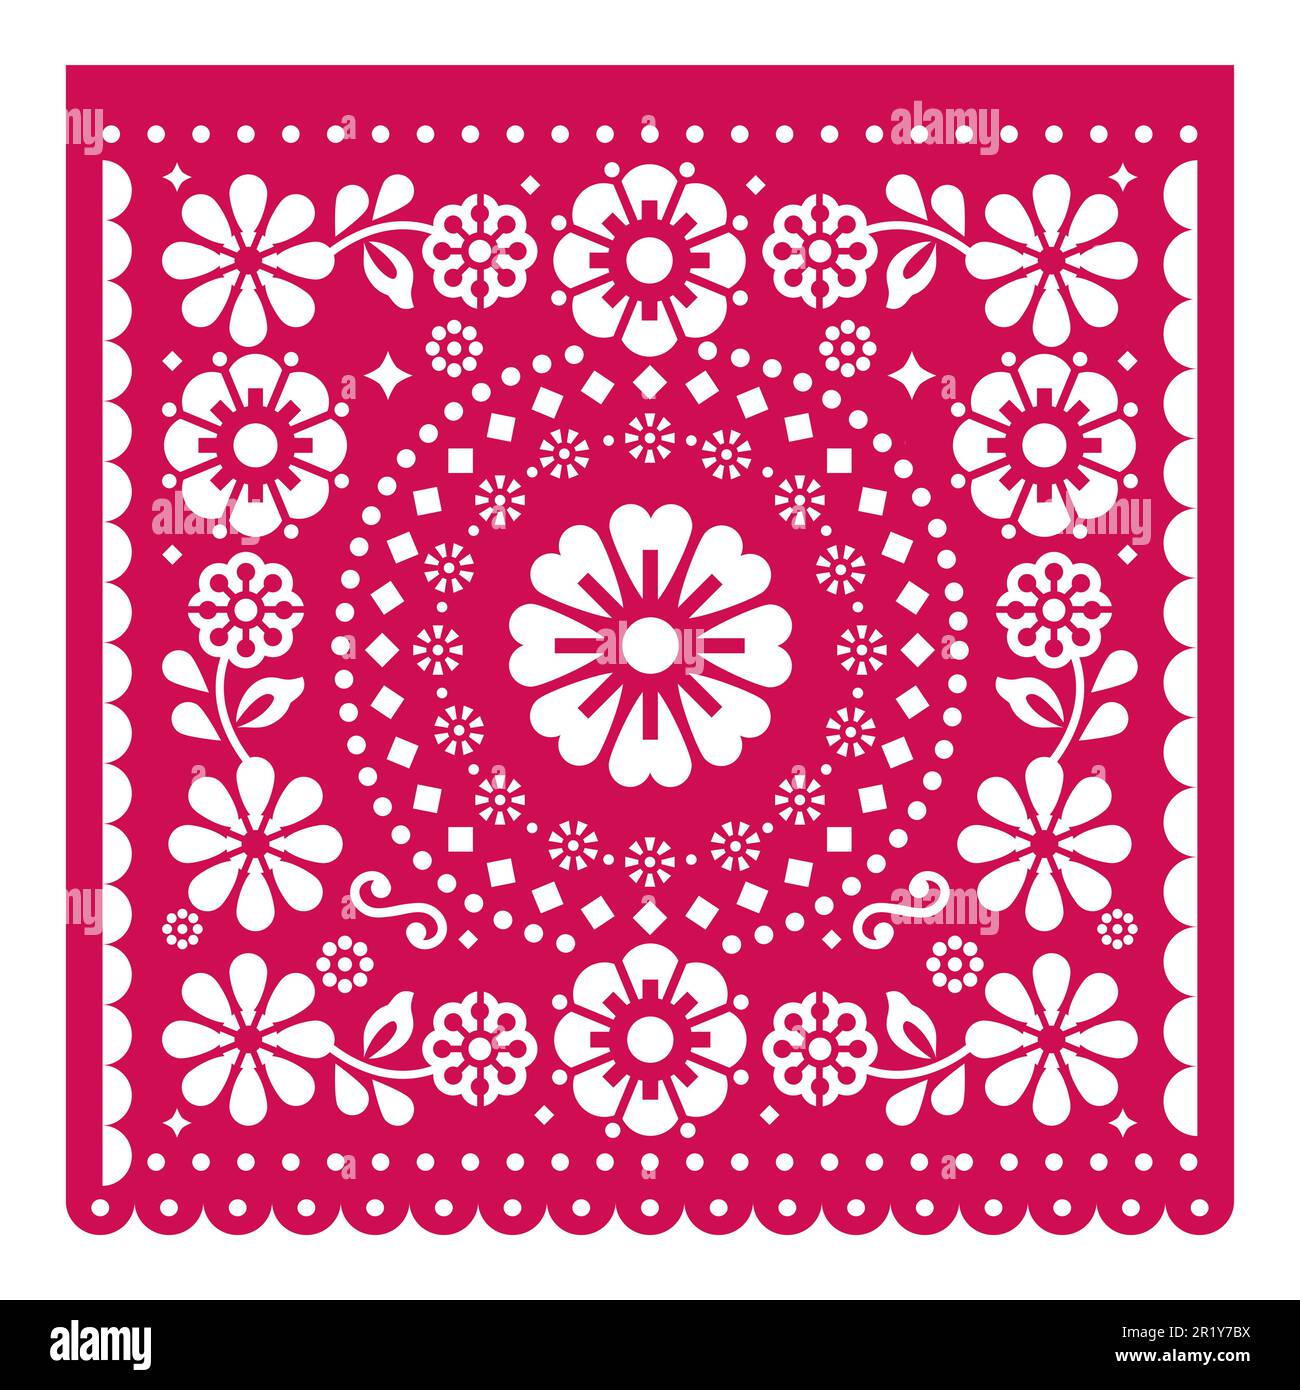 Papel Picado vector square design wit flowers, Mexican cutout paper garland decoration in pink on white background Stock Vector